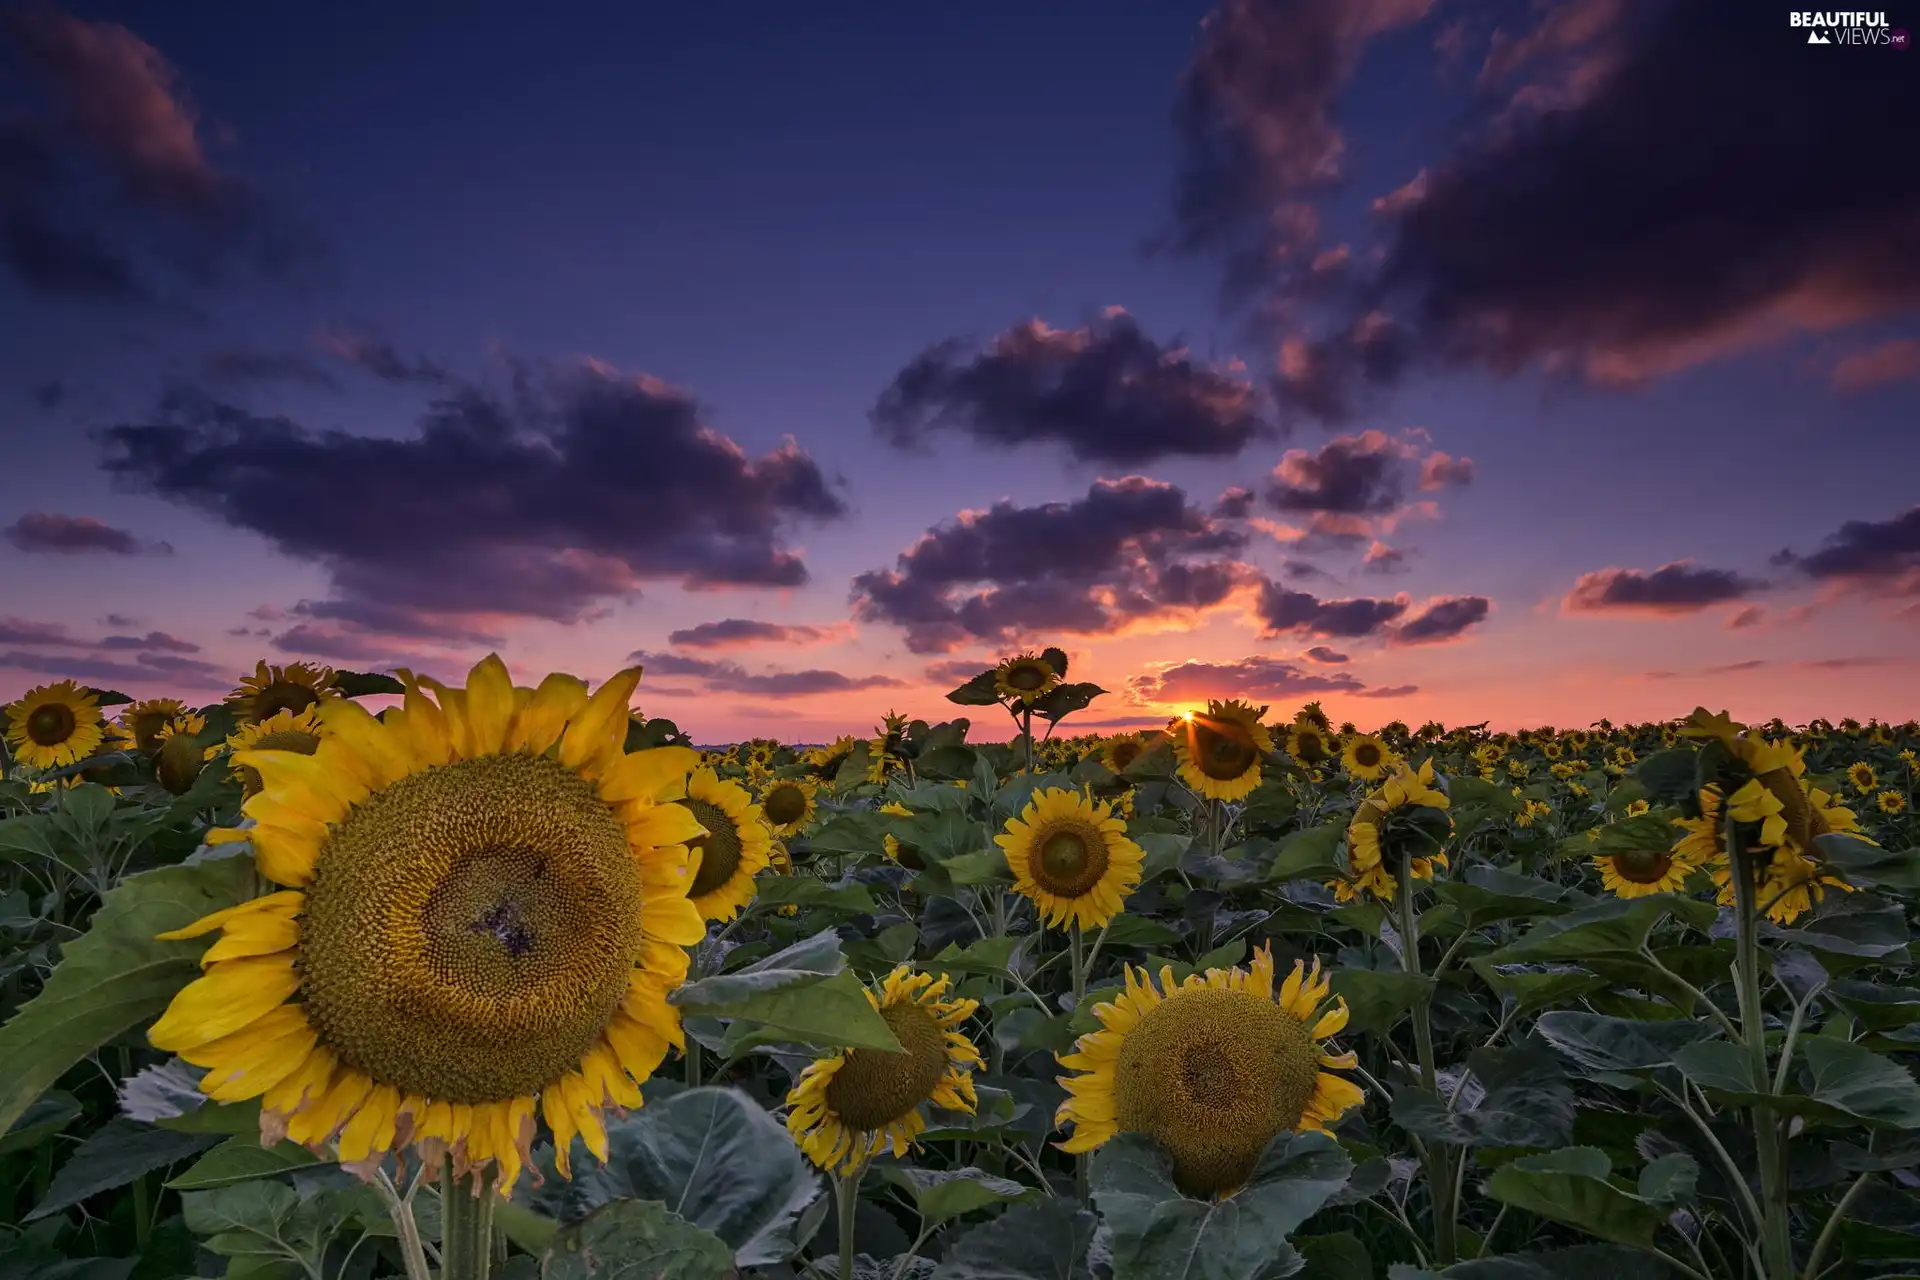 Great Sunsets, clouds, cultivation, Nice sunflowers